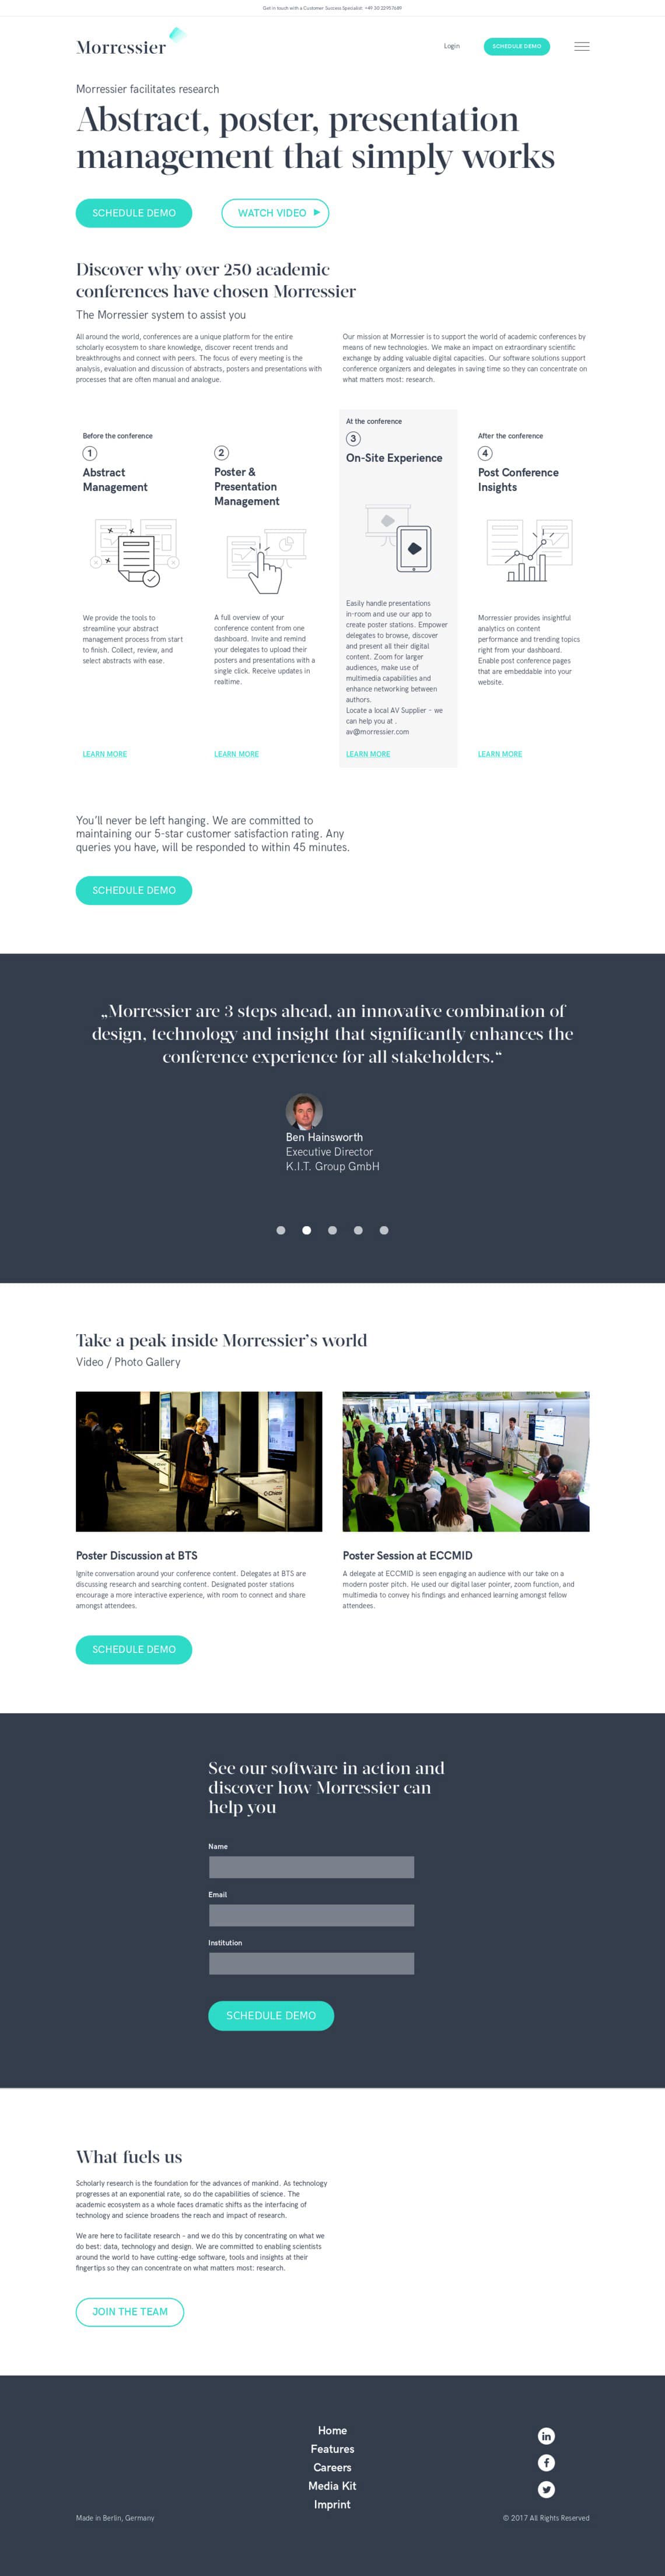 Landing Page als Onepager - Taxmaro Personal